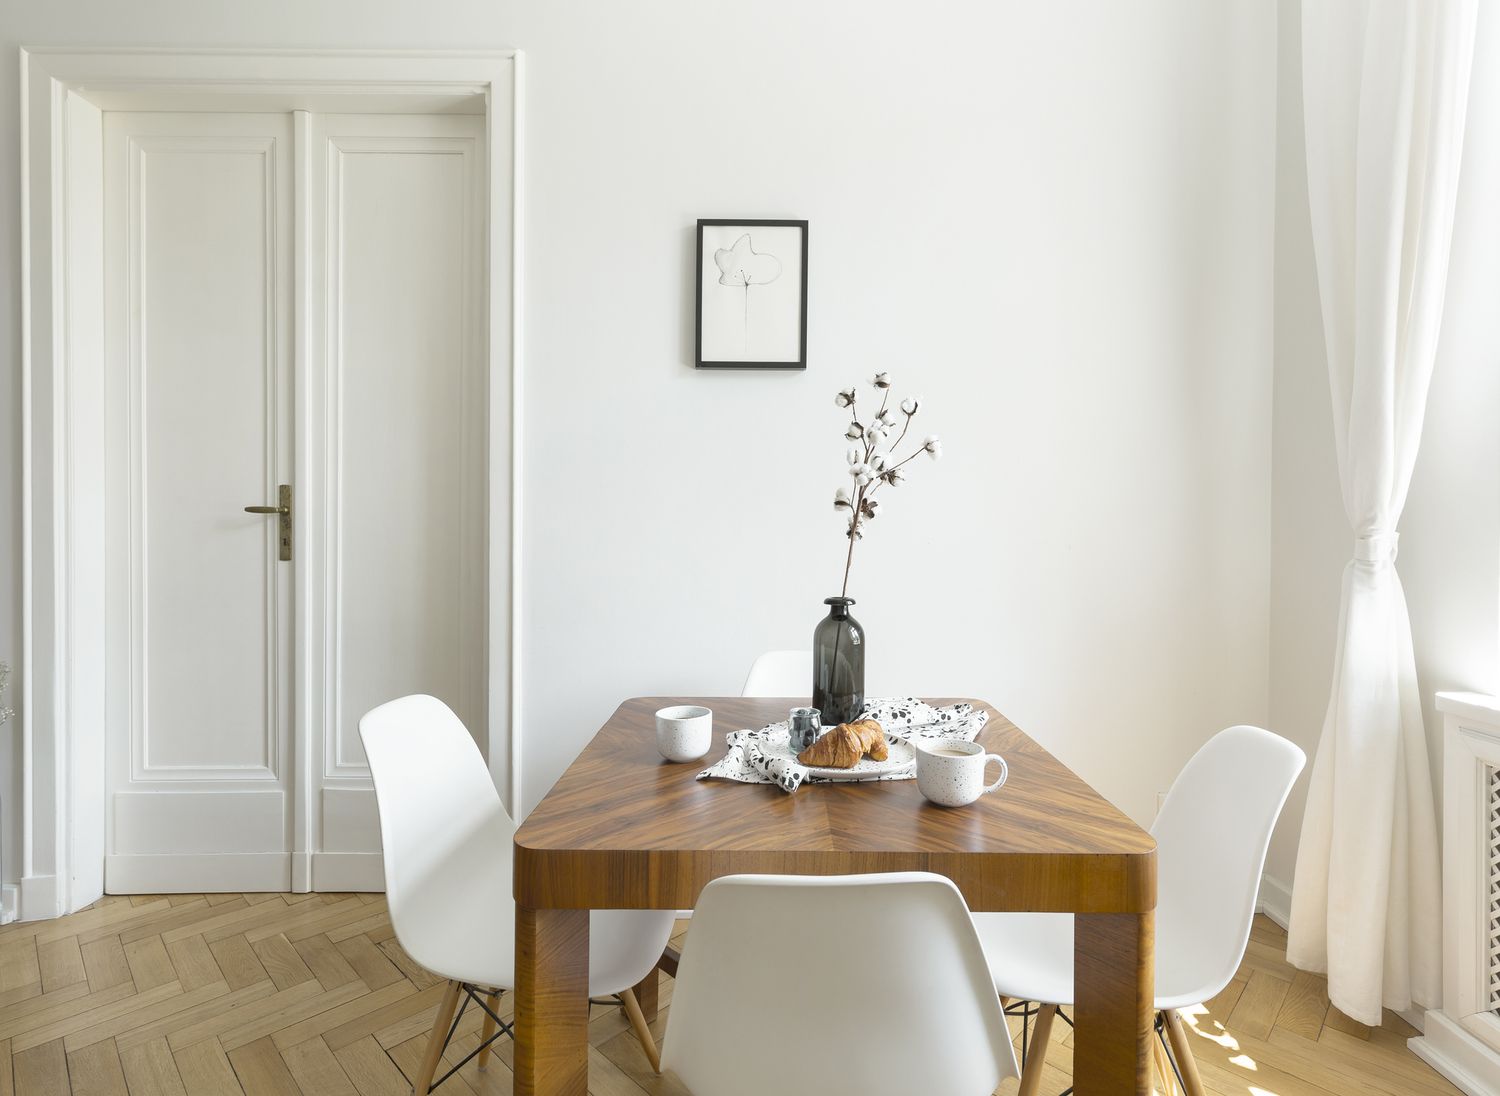 White chairs at wooden table in minimal dining room interior with door and poster.